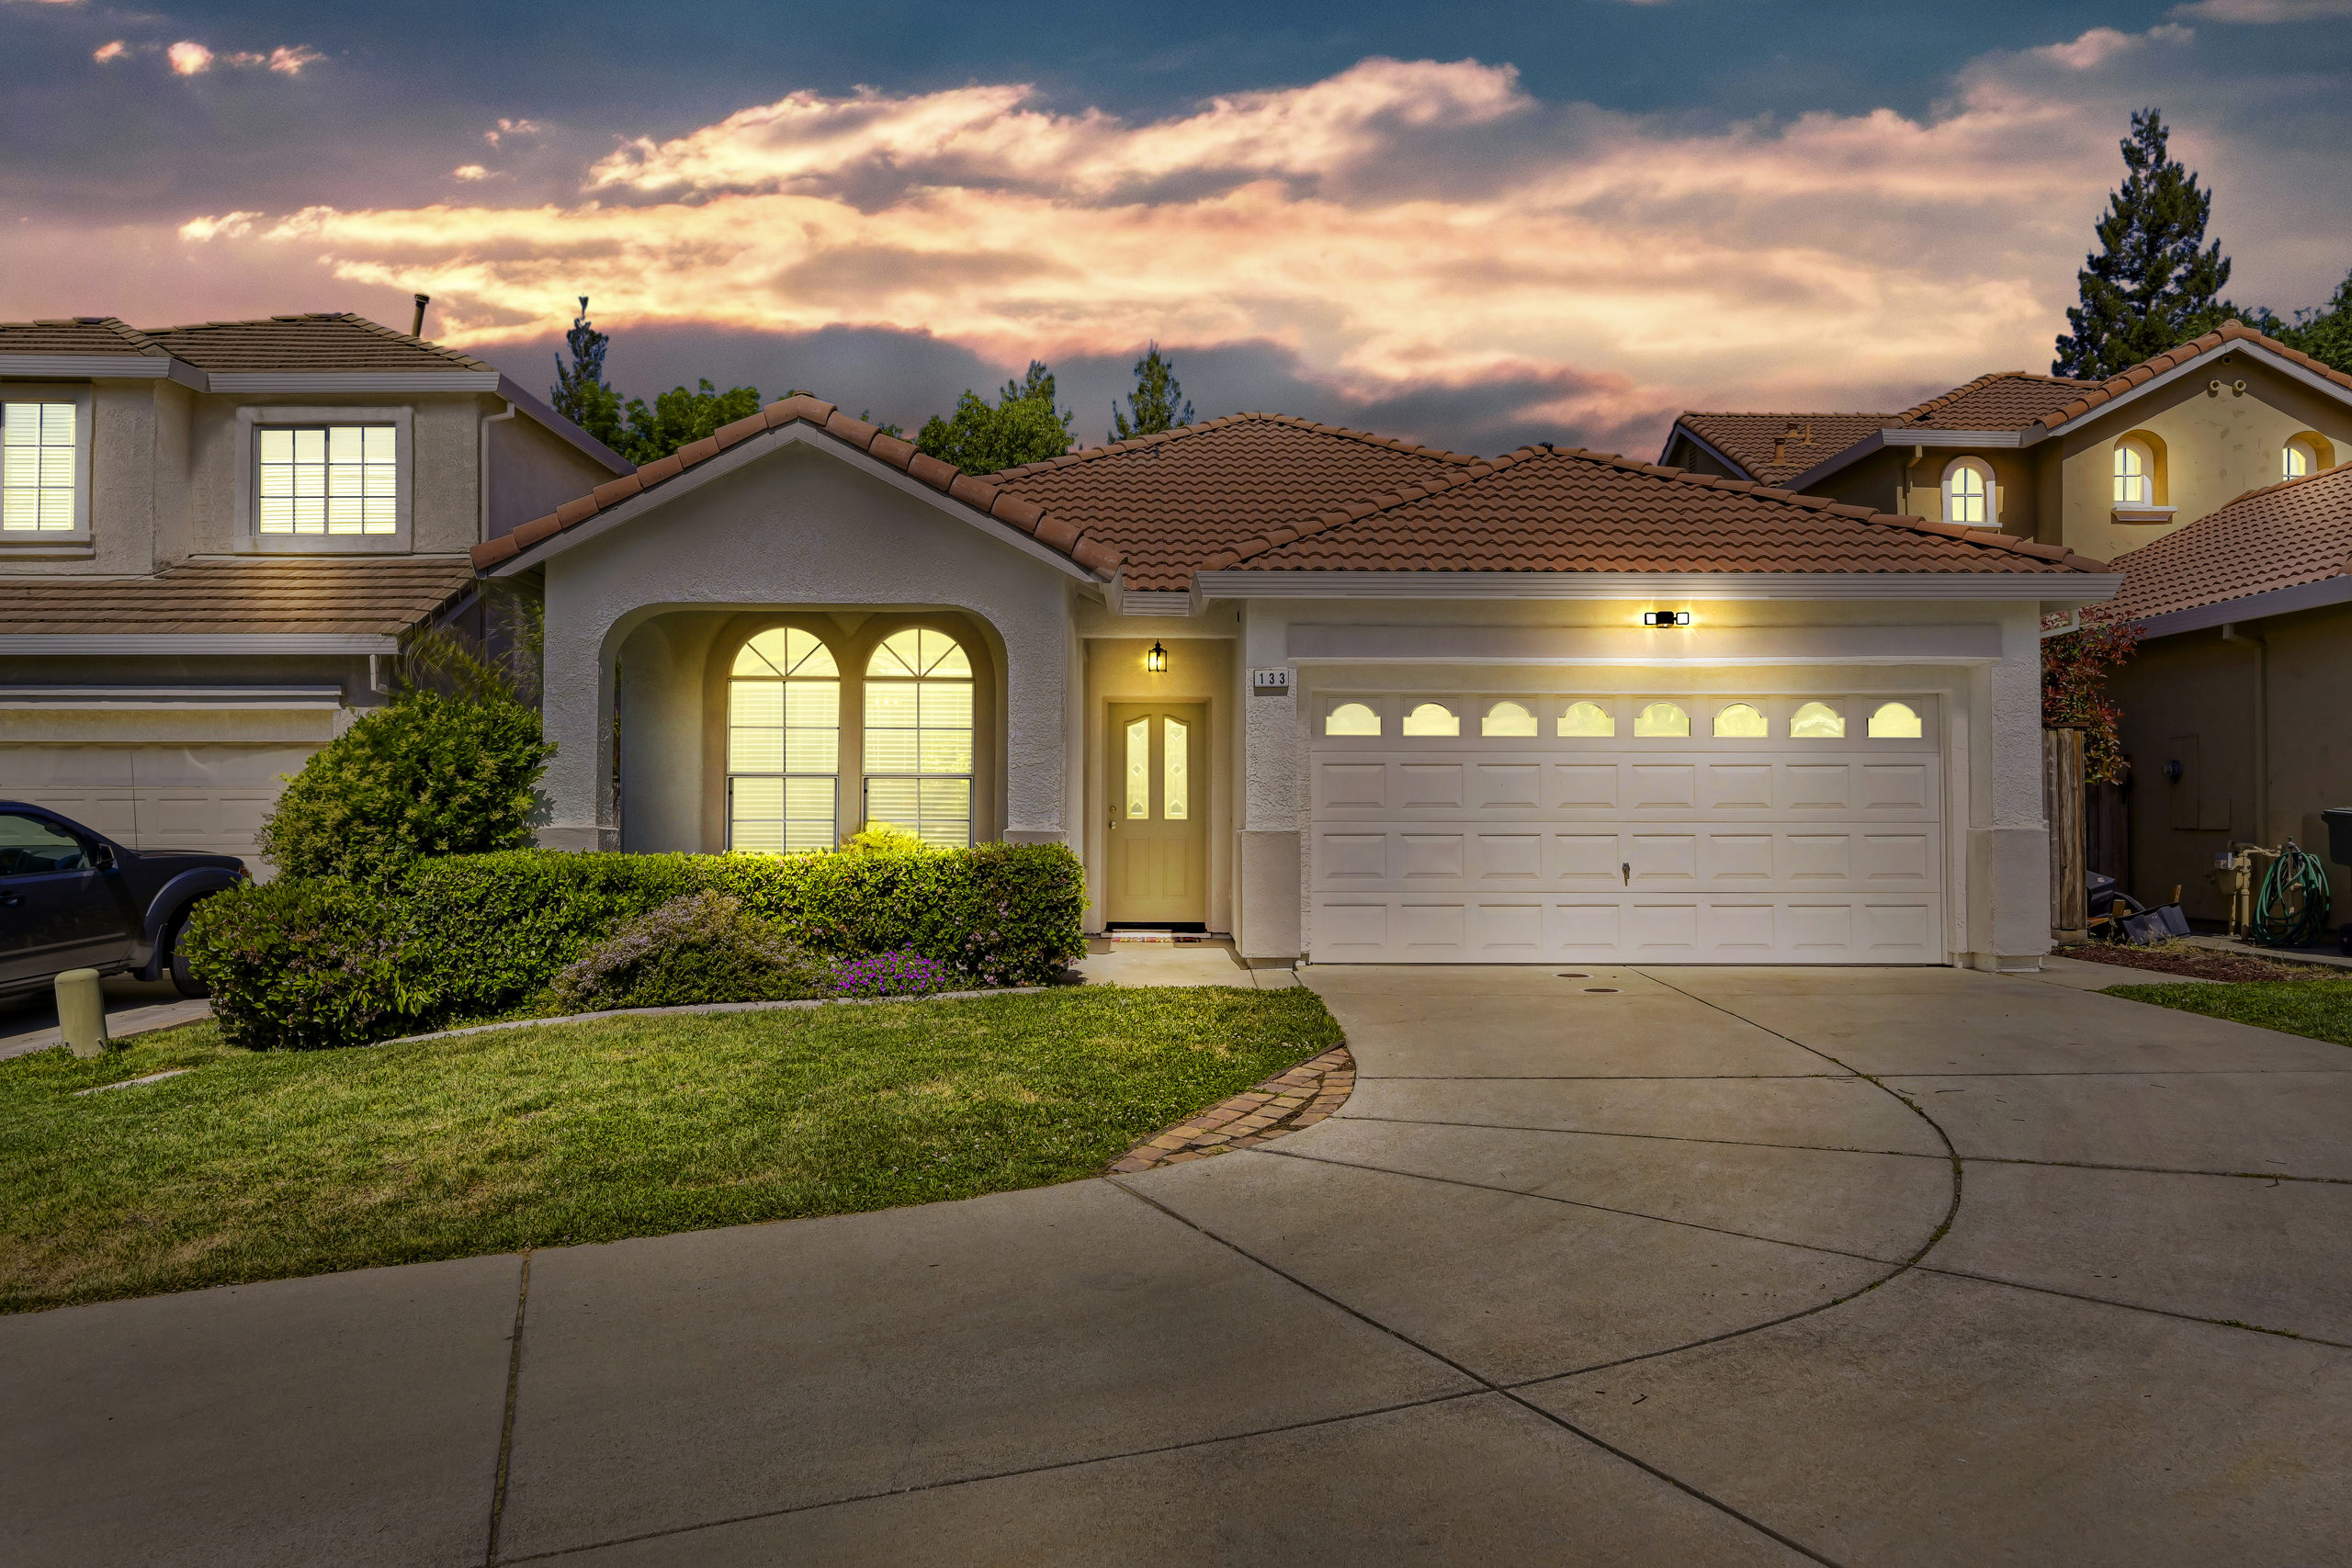 113-Look-Out-Point-Ct.-Roseville-CA-95747-Ck-Real-Estate-dusk-front (1)